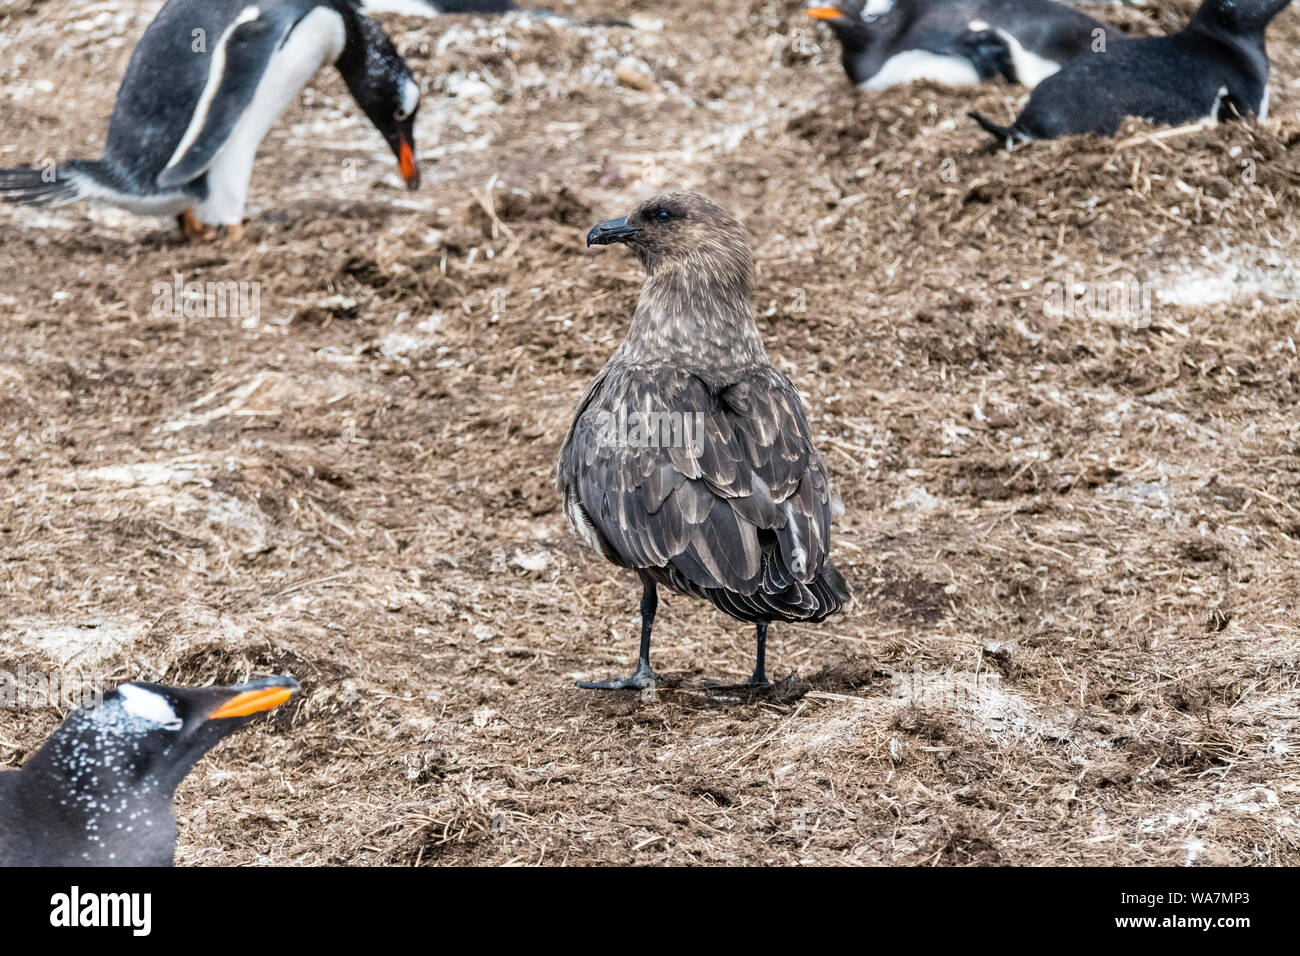 Falkland Skua in a Gentoo Penguin colony looking to take an egg, Sea Lion Island, in the Falkland Islands, South Atlantic Ocean Stock Photo